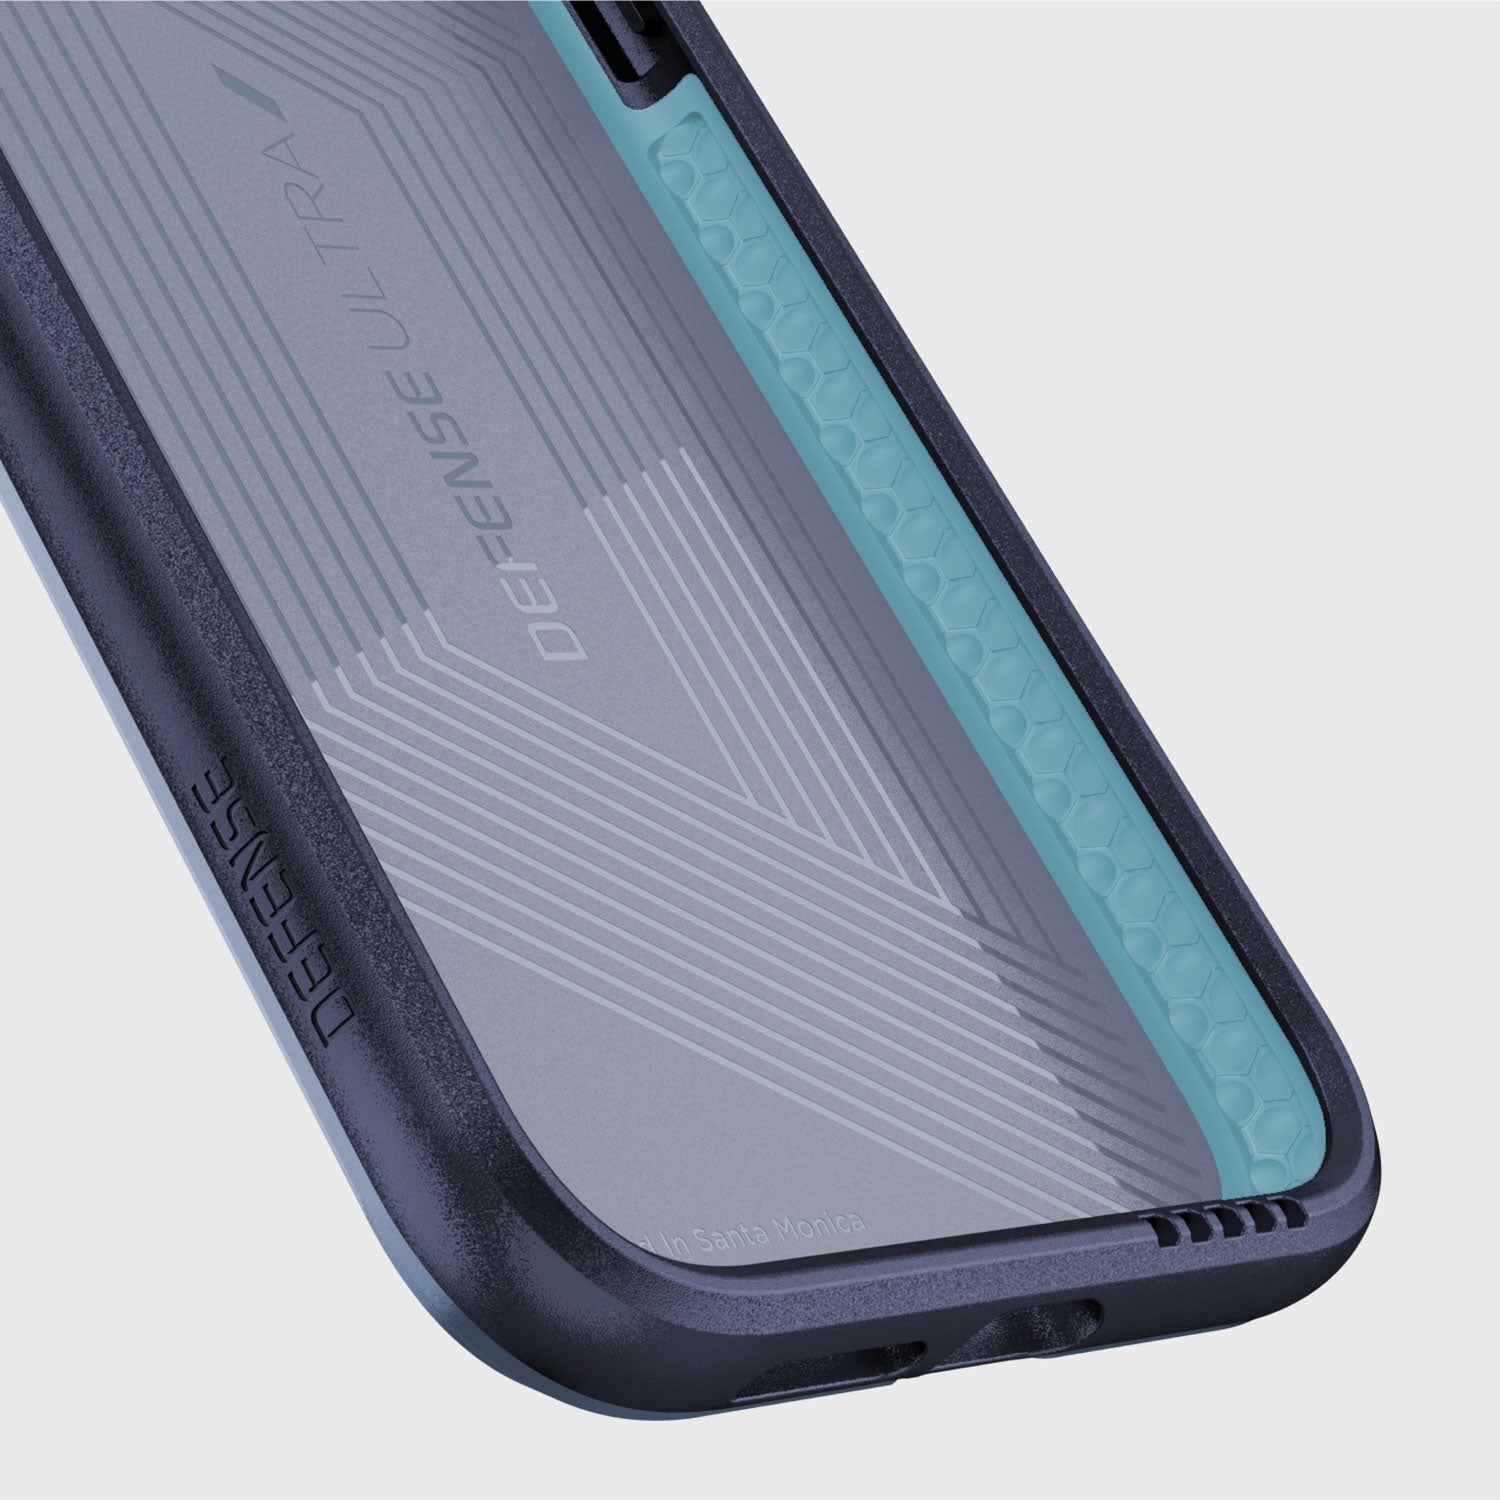 The Raptic ULTRA case provides exceptional device protection for the iPhone XR, especially from the back view.